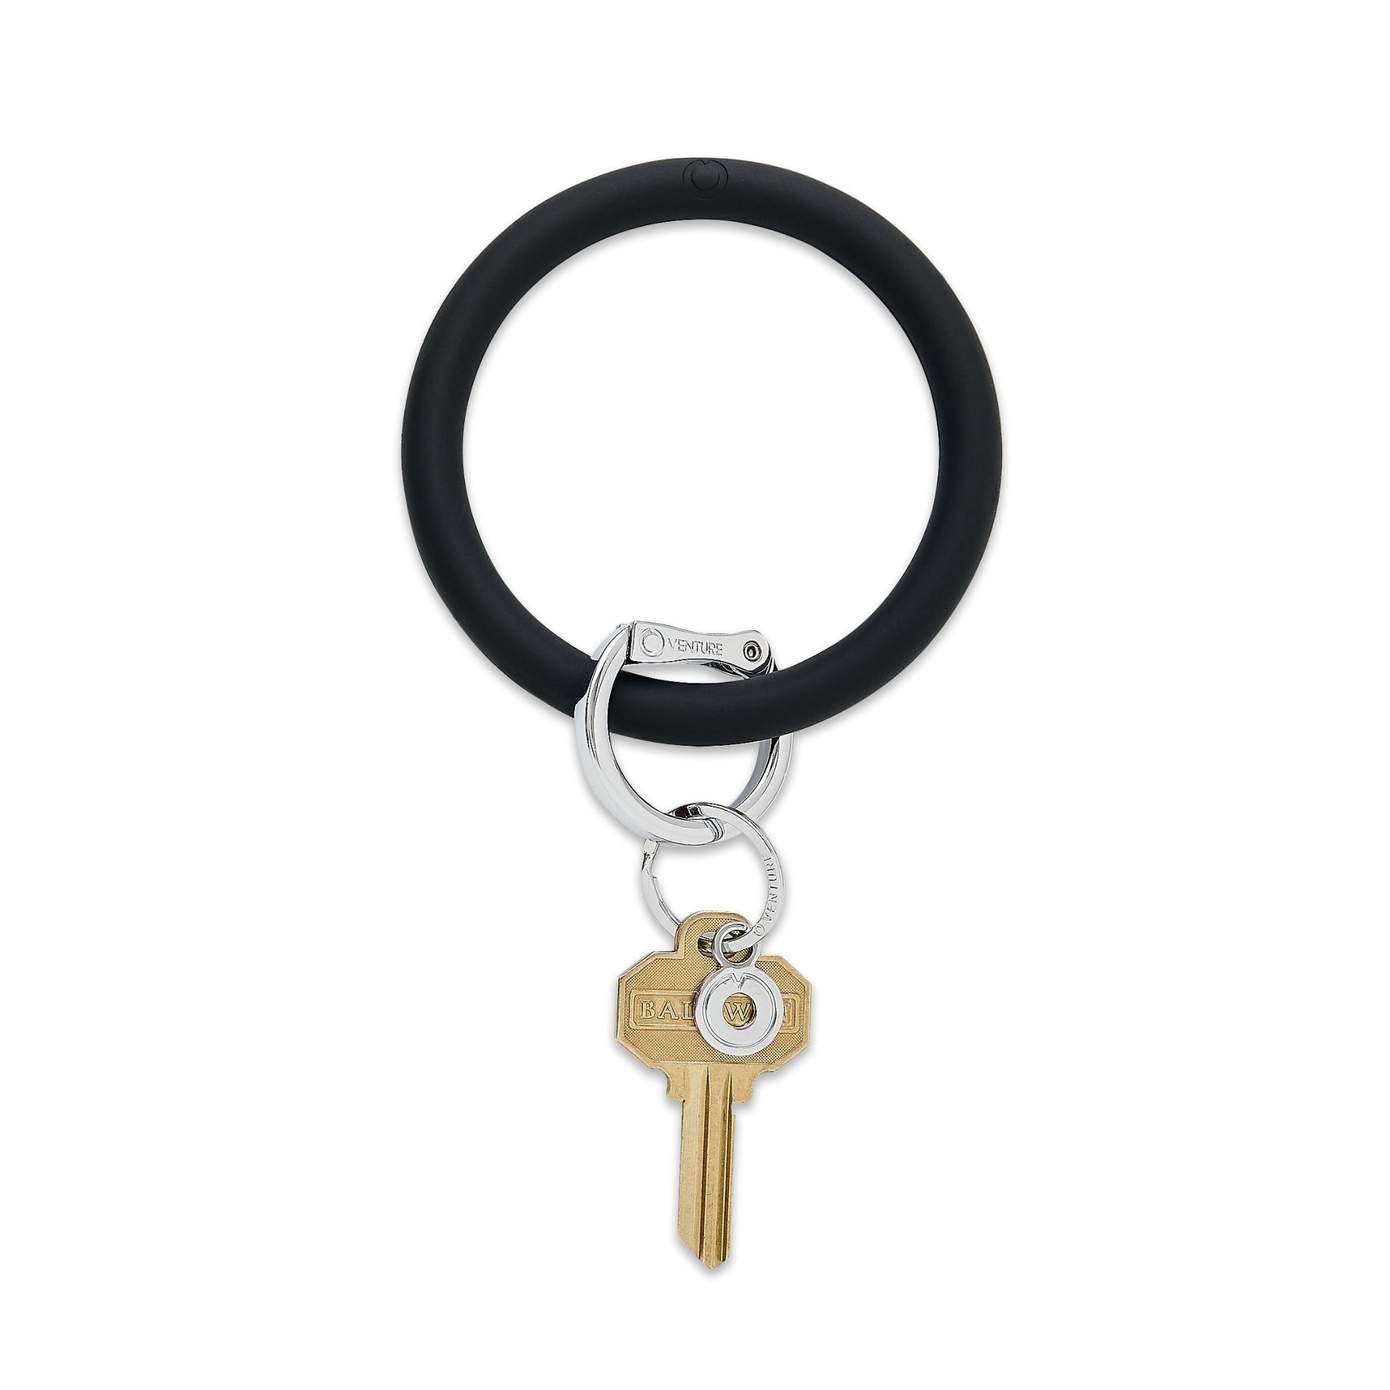 Oventure Key Ring - Provisions Mercantile